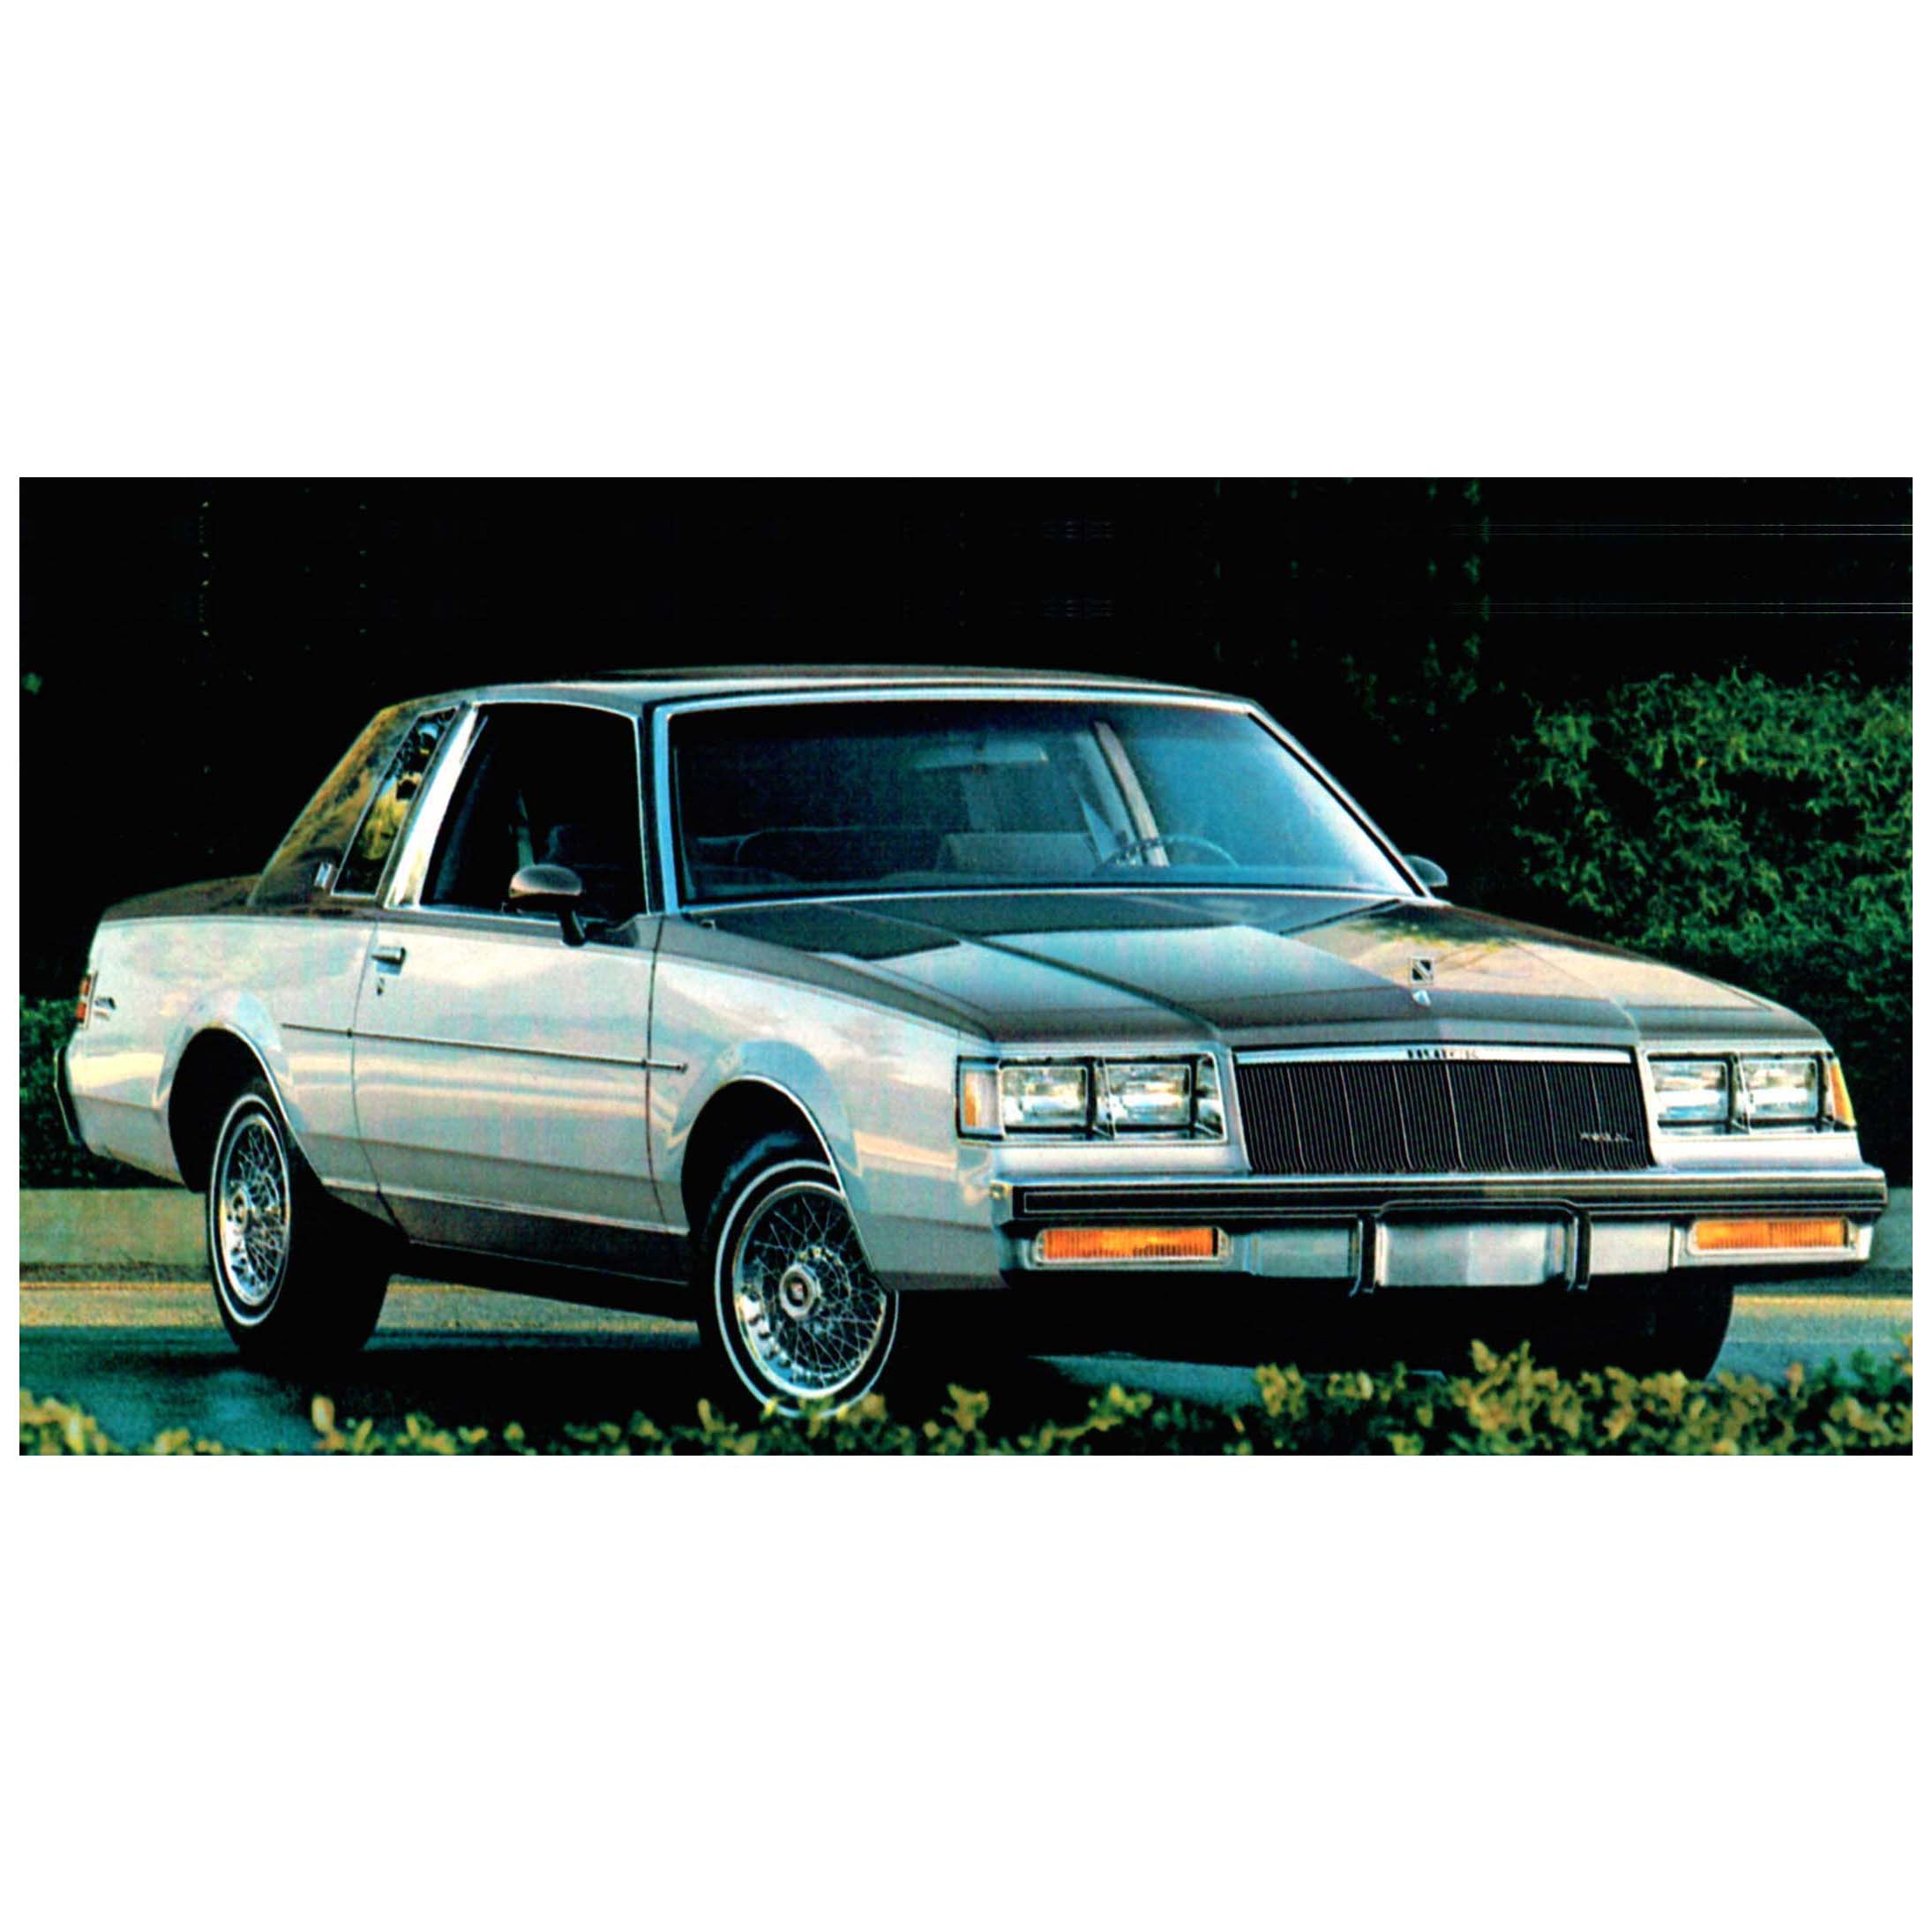 1986 Buick Regal Facts